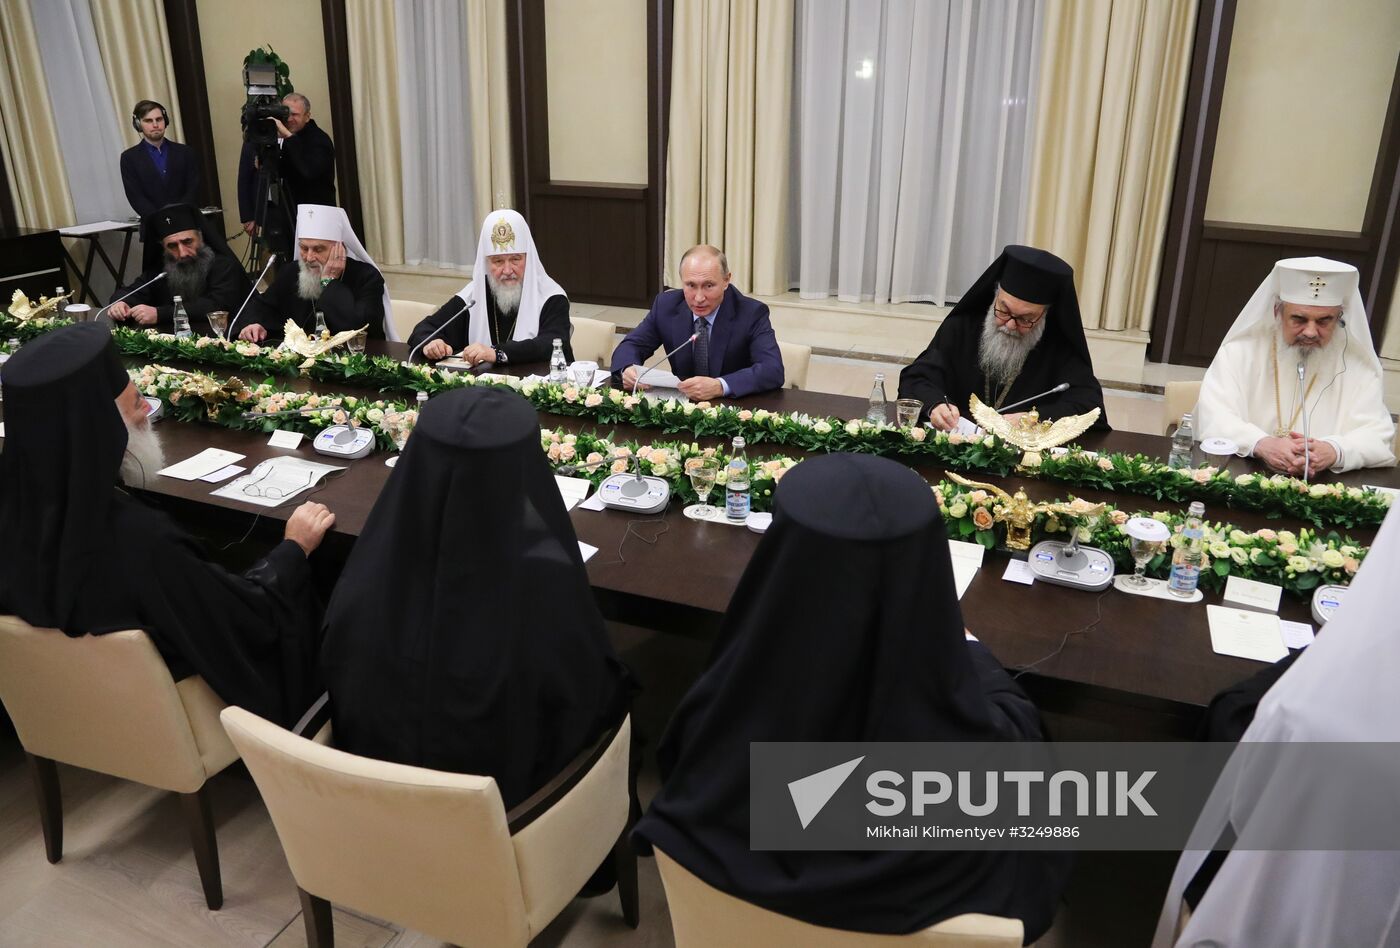 President Vladimir Putin meets with heads of delegations of local Orthodox churches